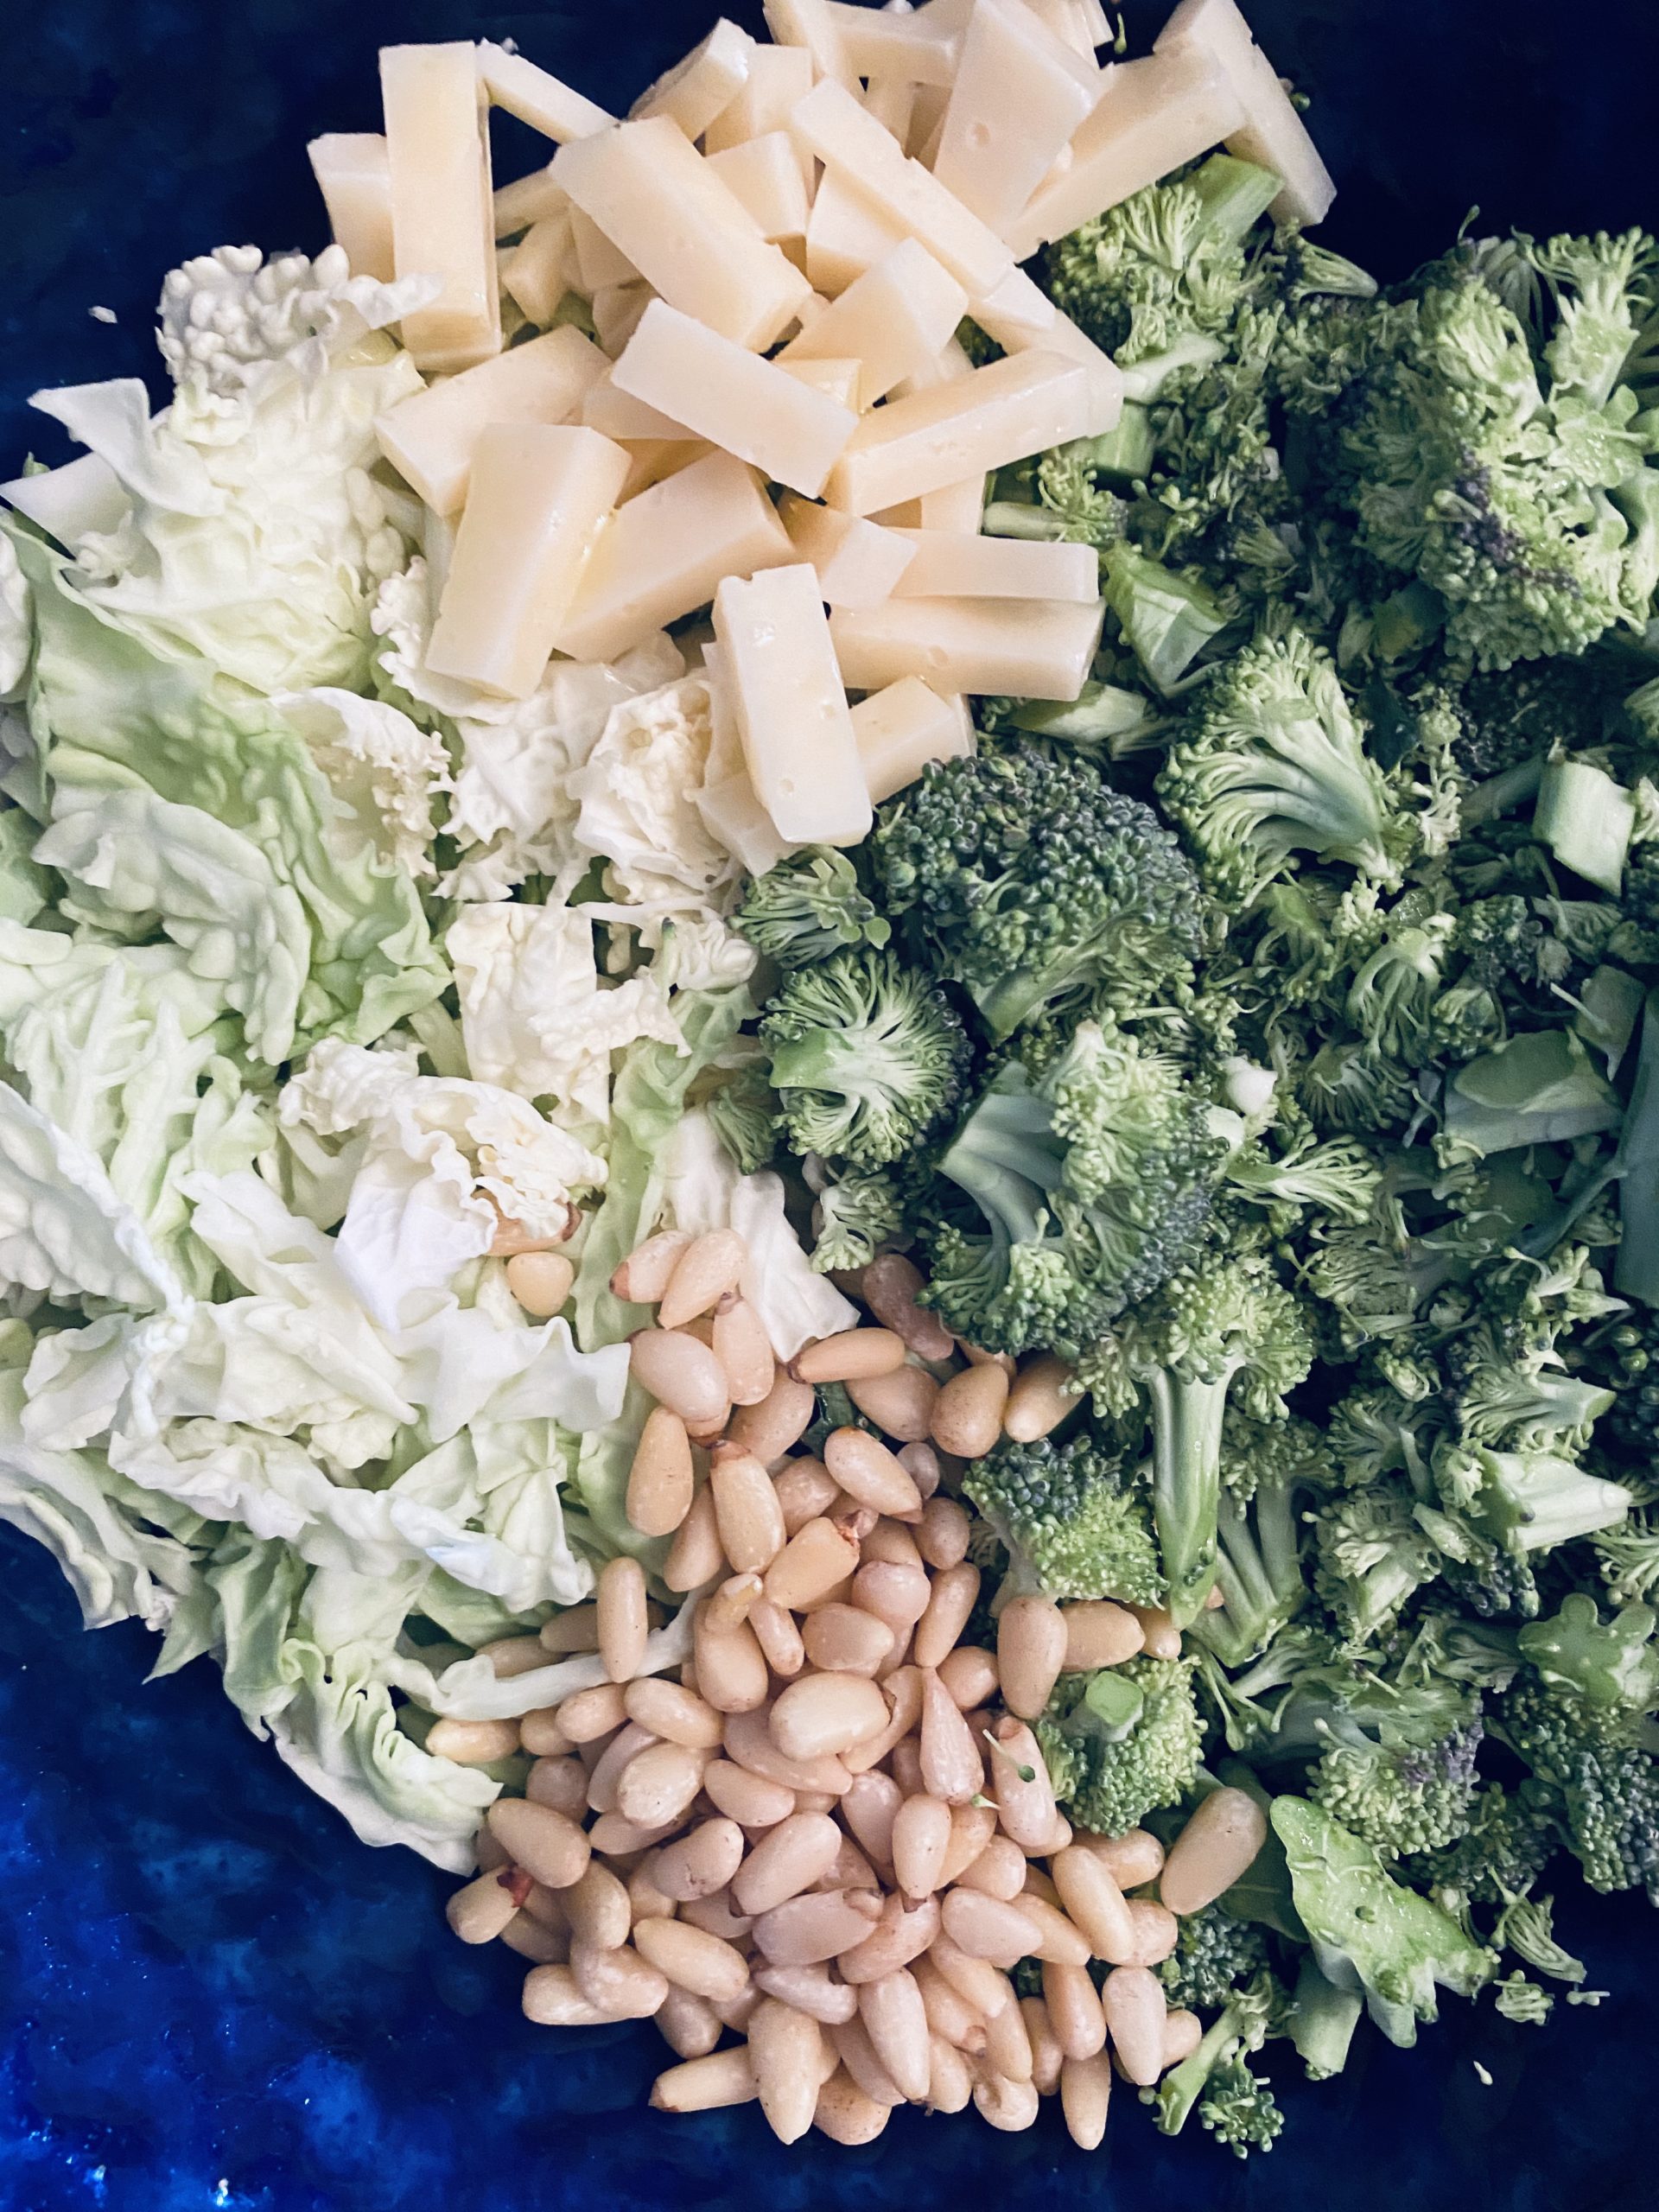 Broccoli Cabbage Caesar Salad ready to be dressed.